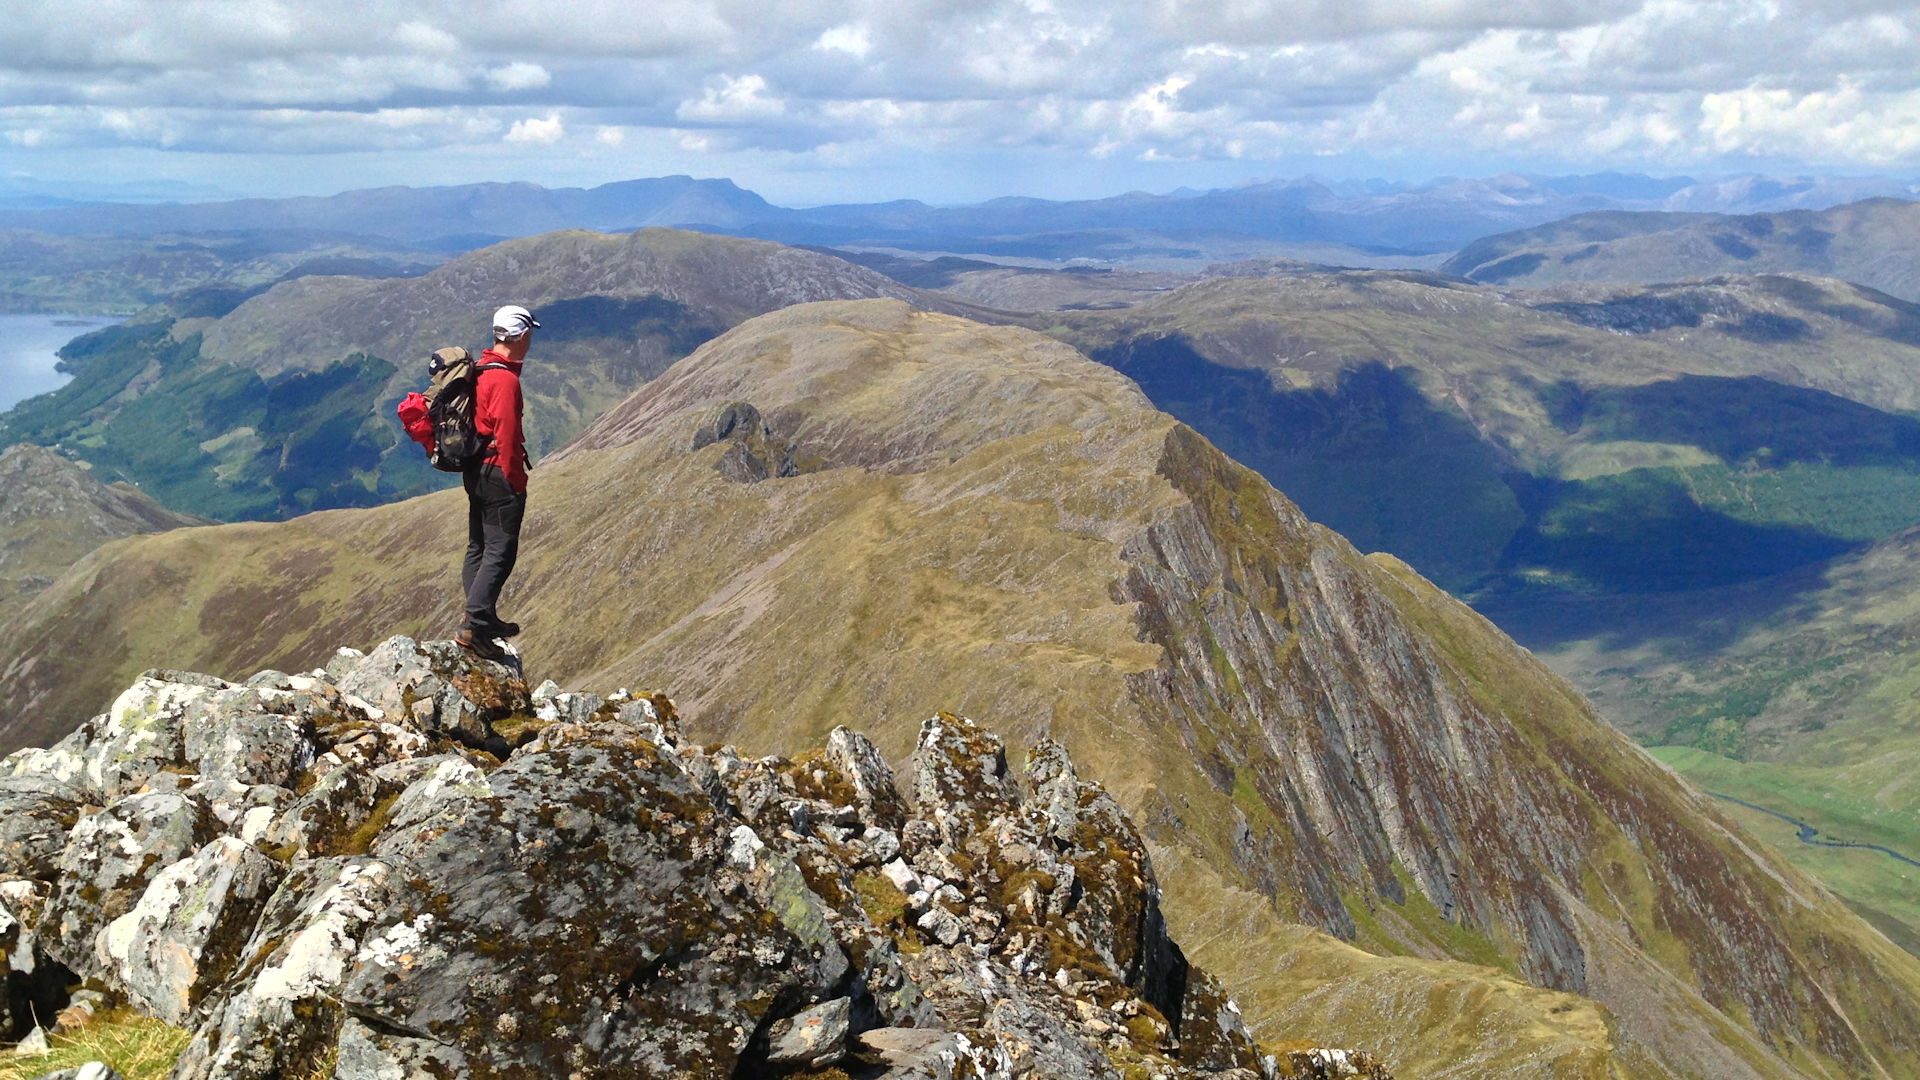 Sisters of Kintail